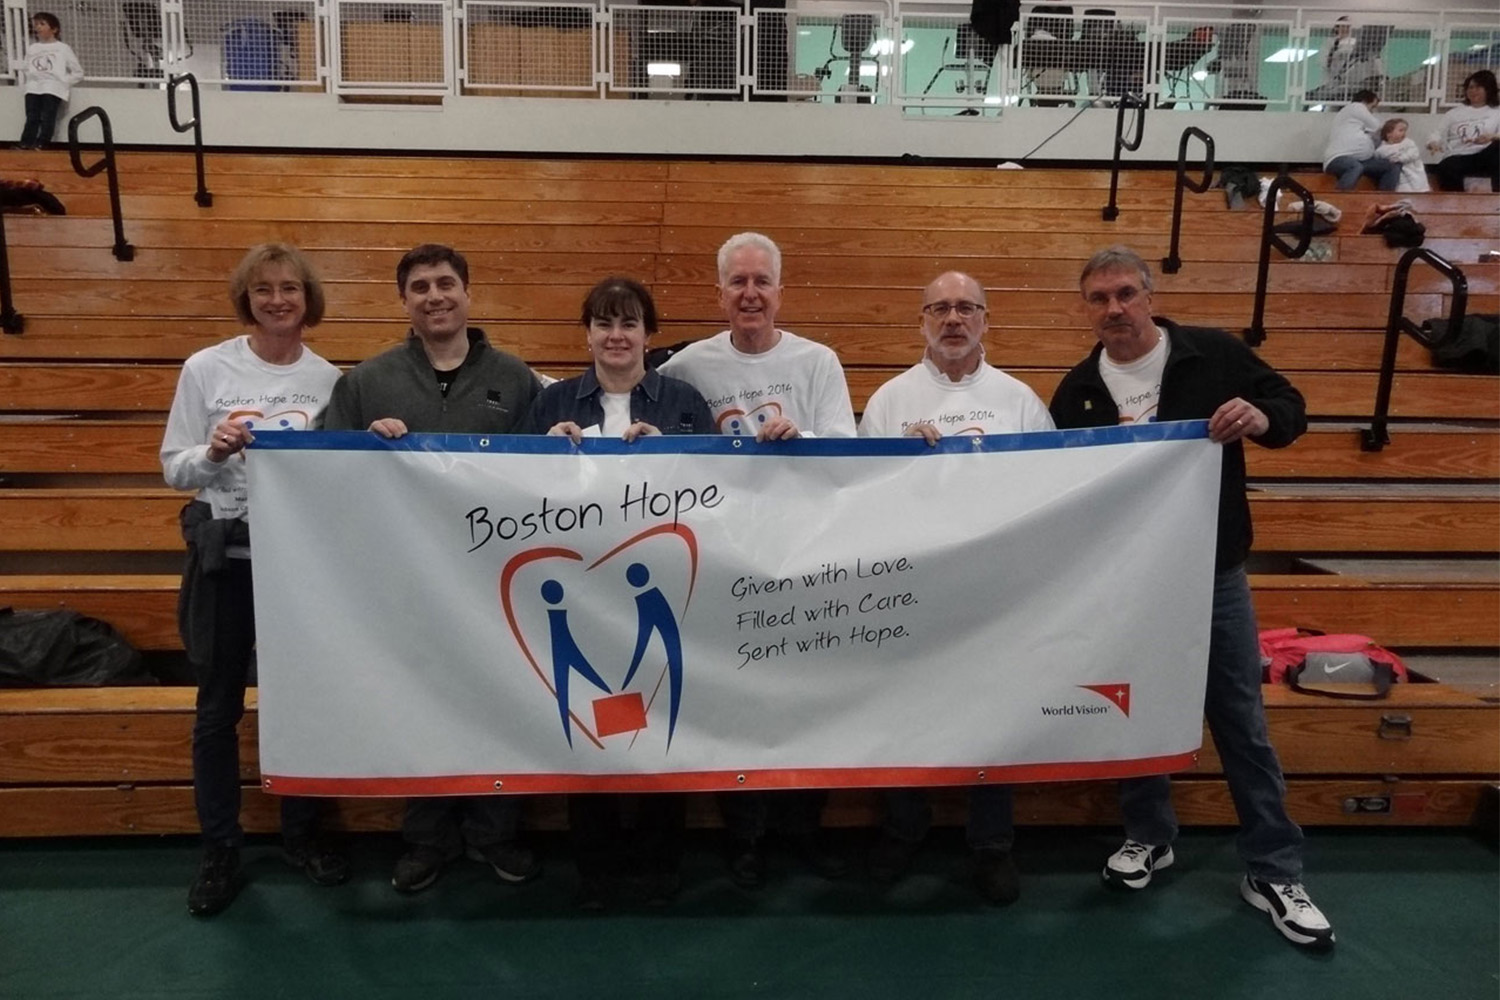 Tocci Boston hope volunteers, posing for phot while holding "Boston Hope" banner